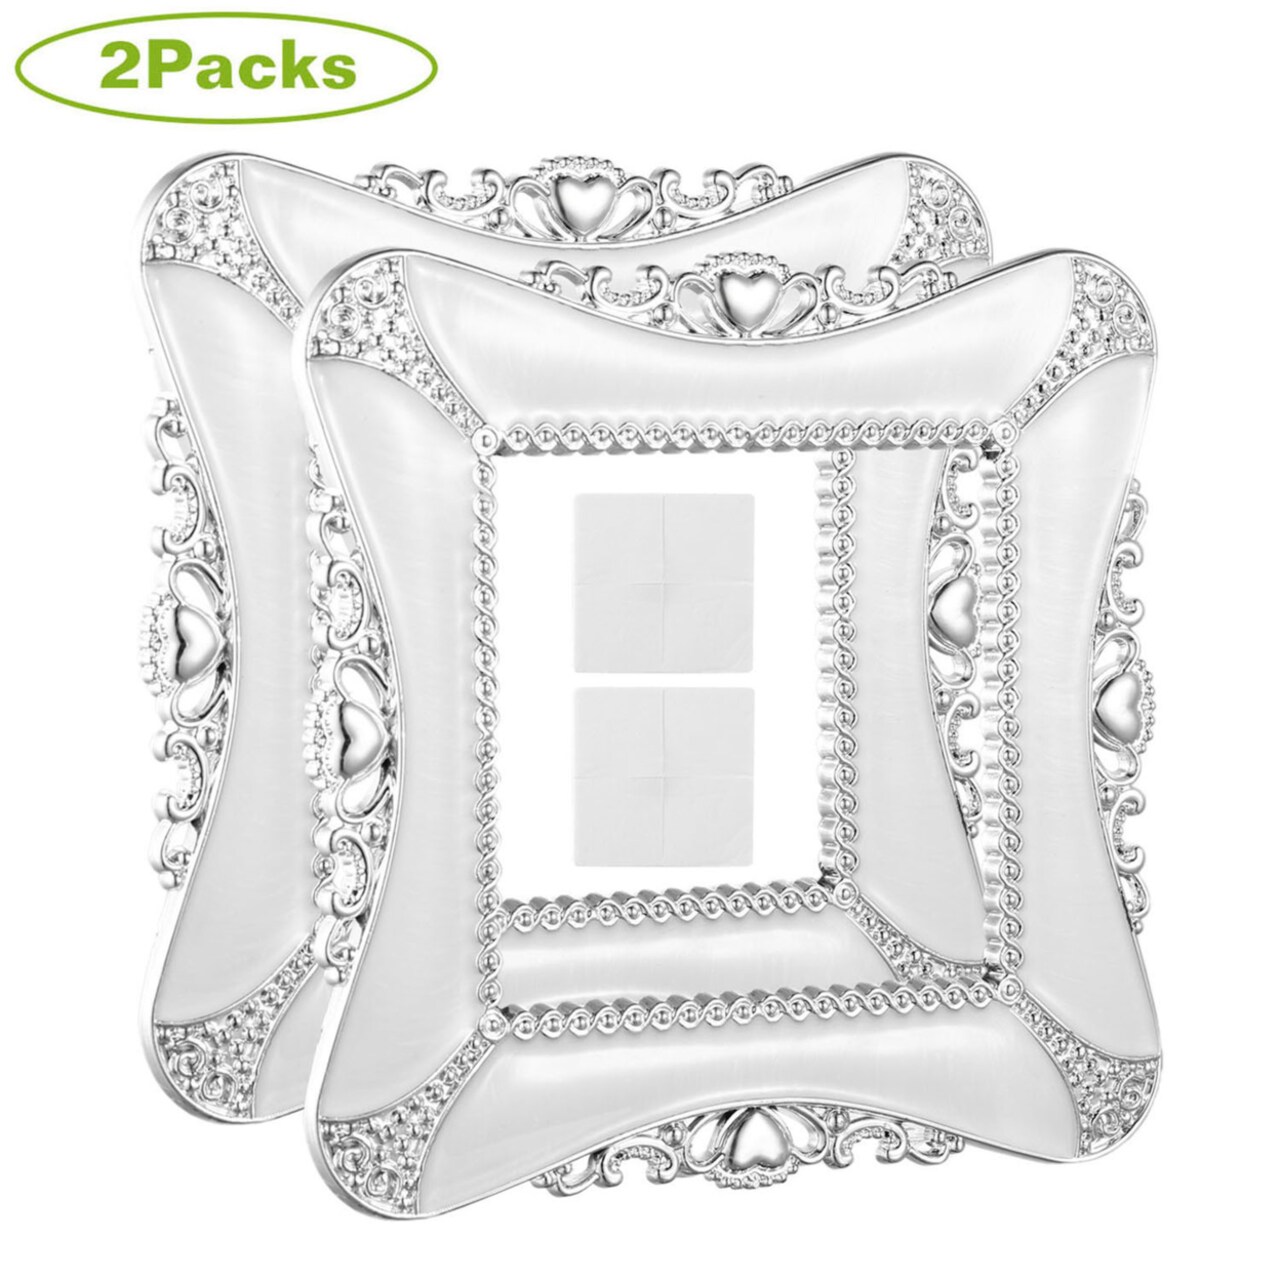 Global Phoenix 2 Packs Decorative Switch Cover European Romantic Wall Plate Protector